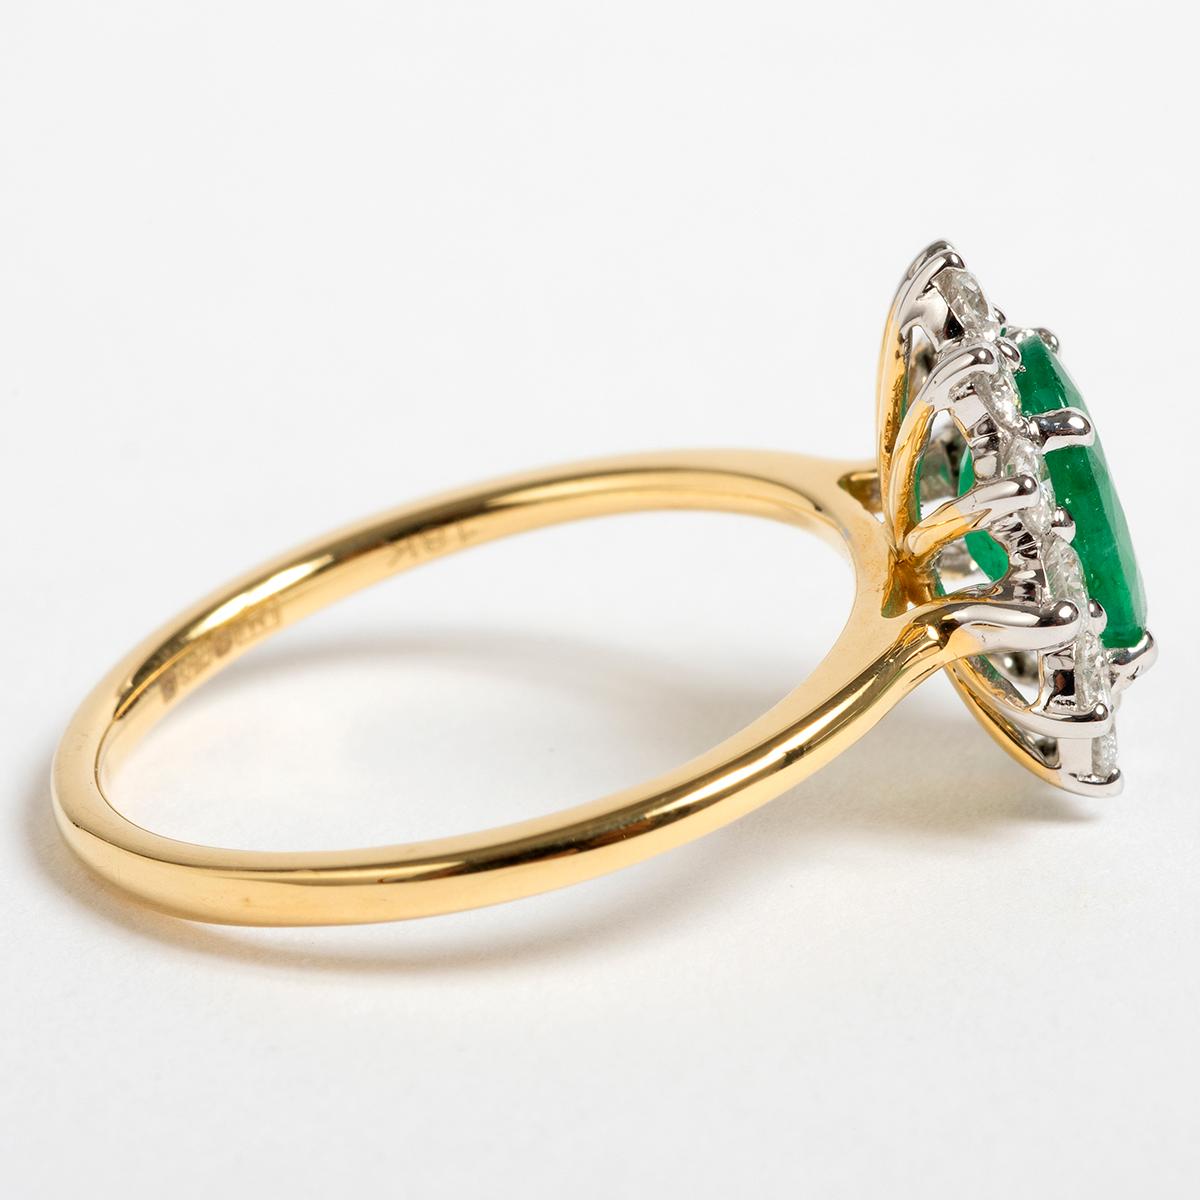 A unique piece within our carefully curated Vintage & Prestige fine jewellery collection, we are delighted to present the following:

This classic 18ct emerald and diamond cluster ring weights approx 0.53ct in diamonds and 1.08ct in emeralds. UK